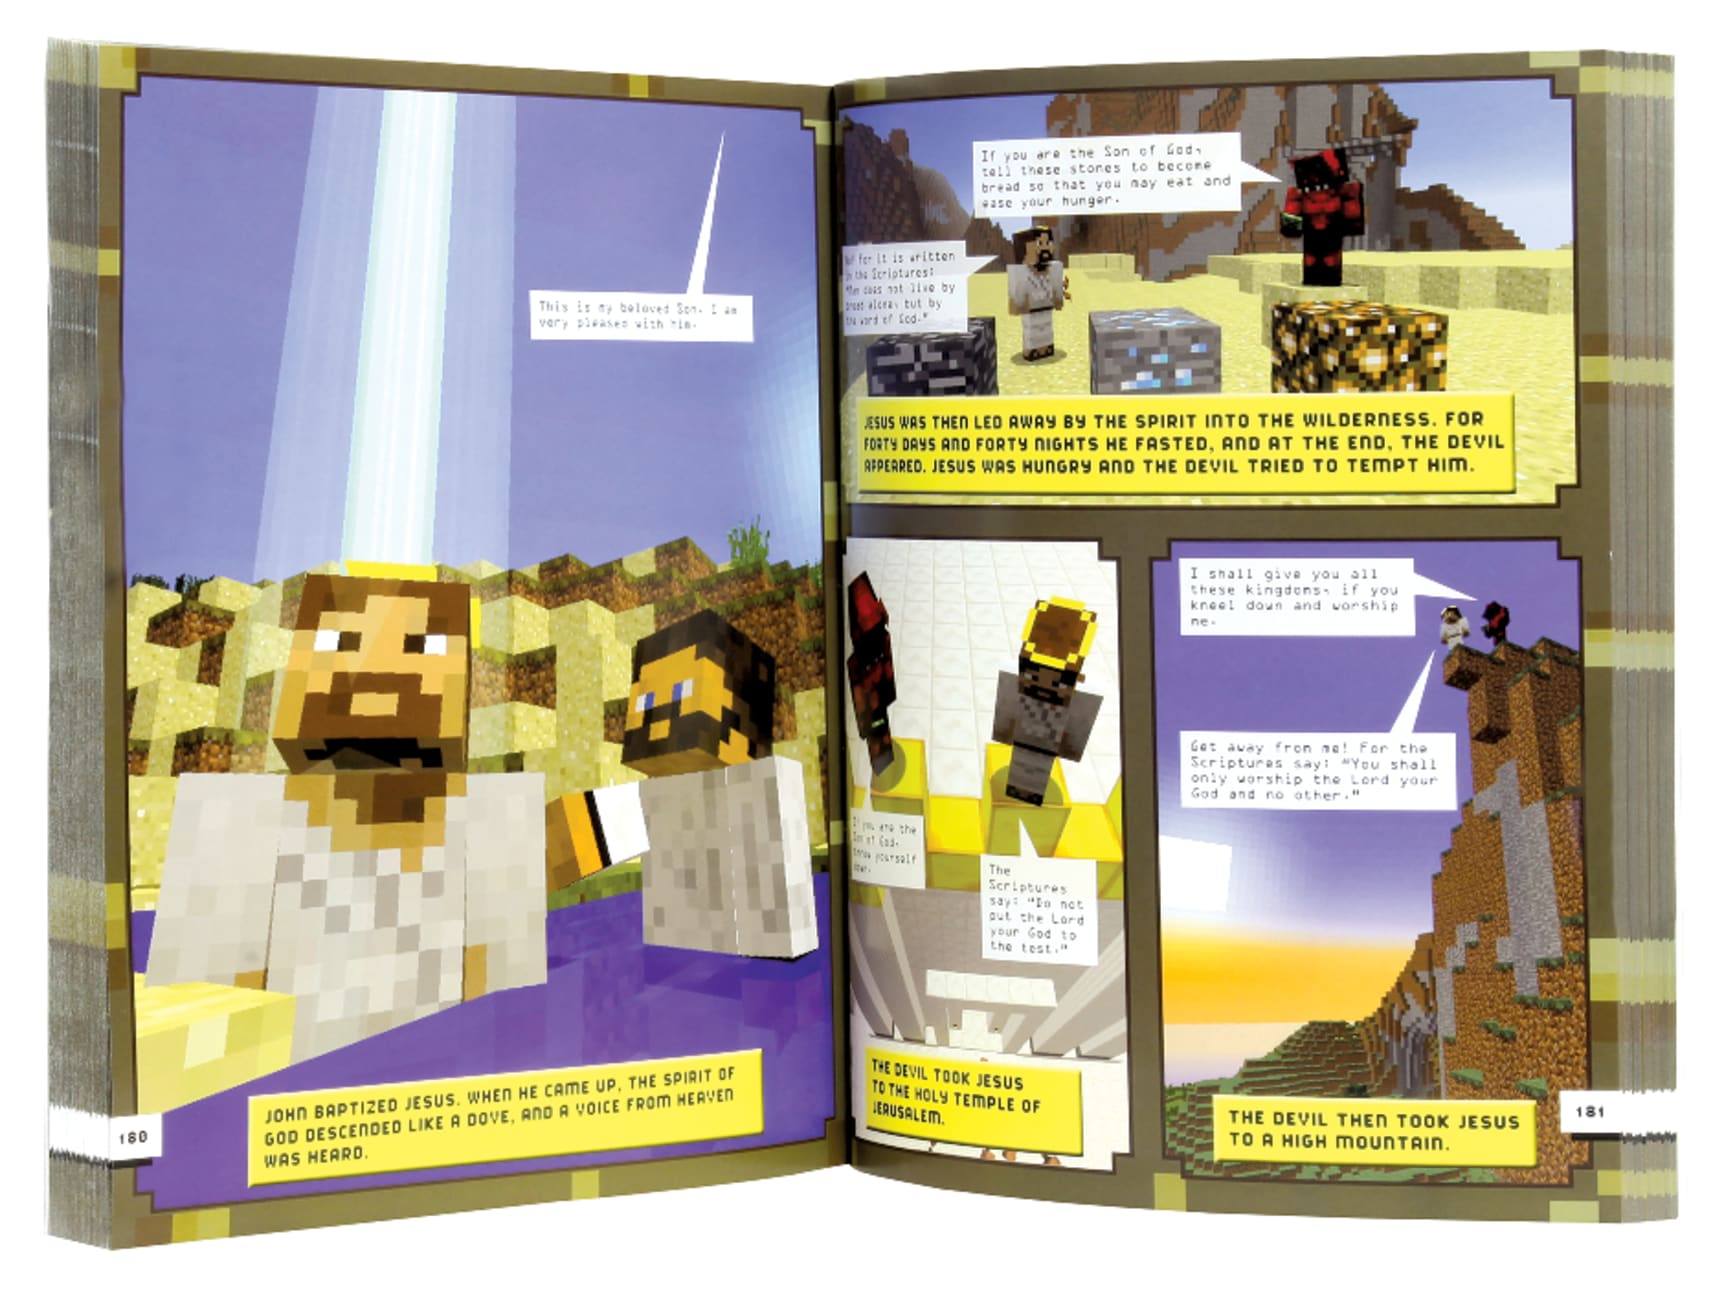 The Unofficial Bible For Minecrafters Paperback